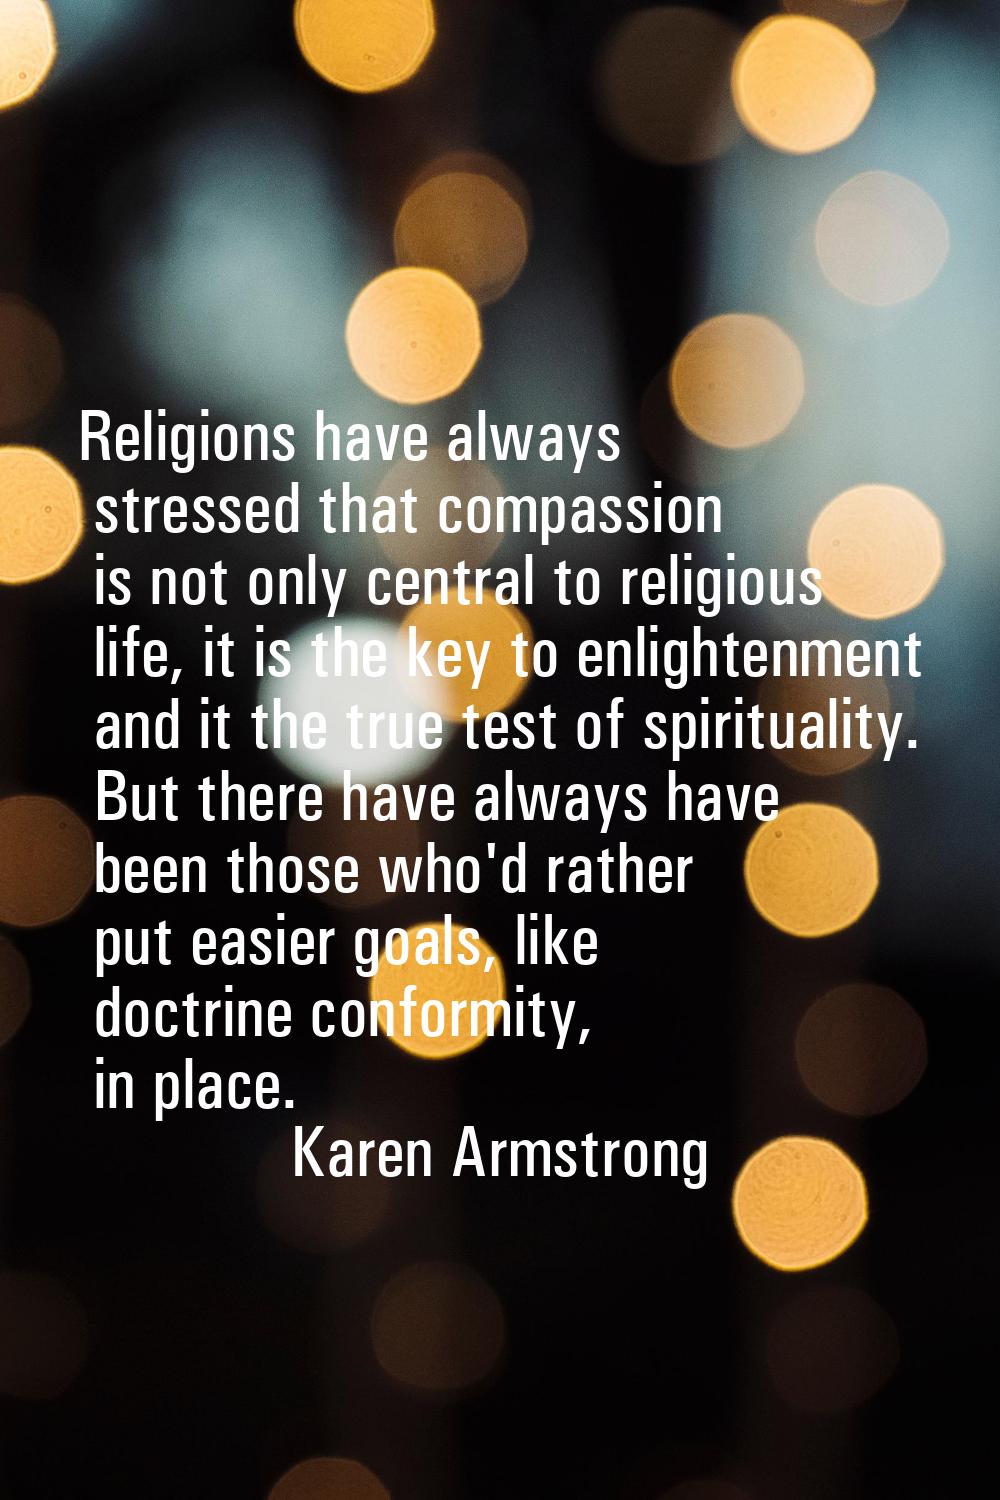 Religions have always stressed that compassion is not only central to religious life, it is the key